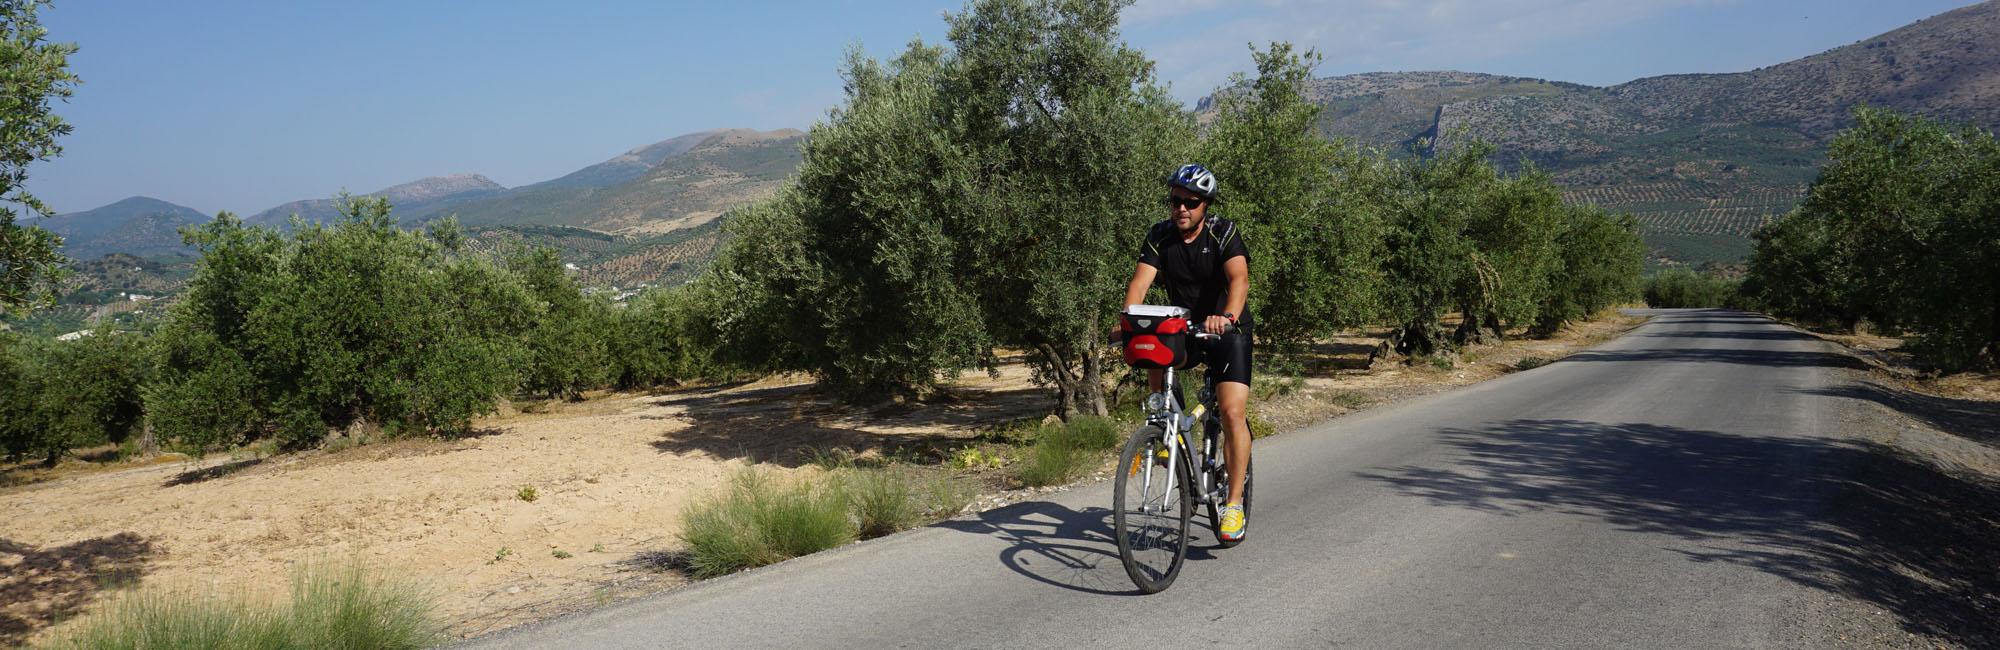 Cyclist in Andalucía